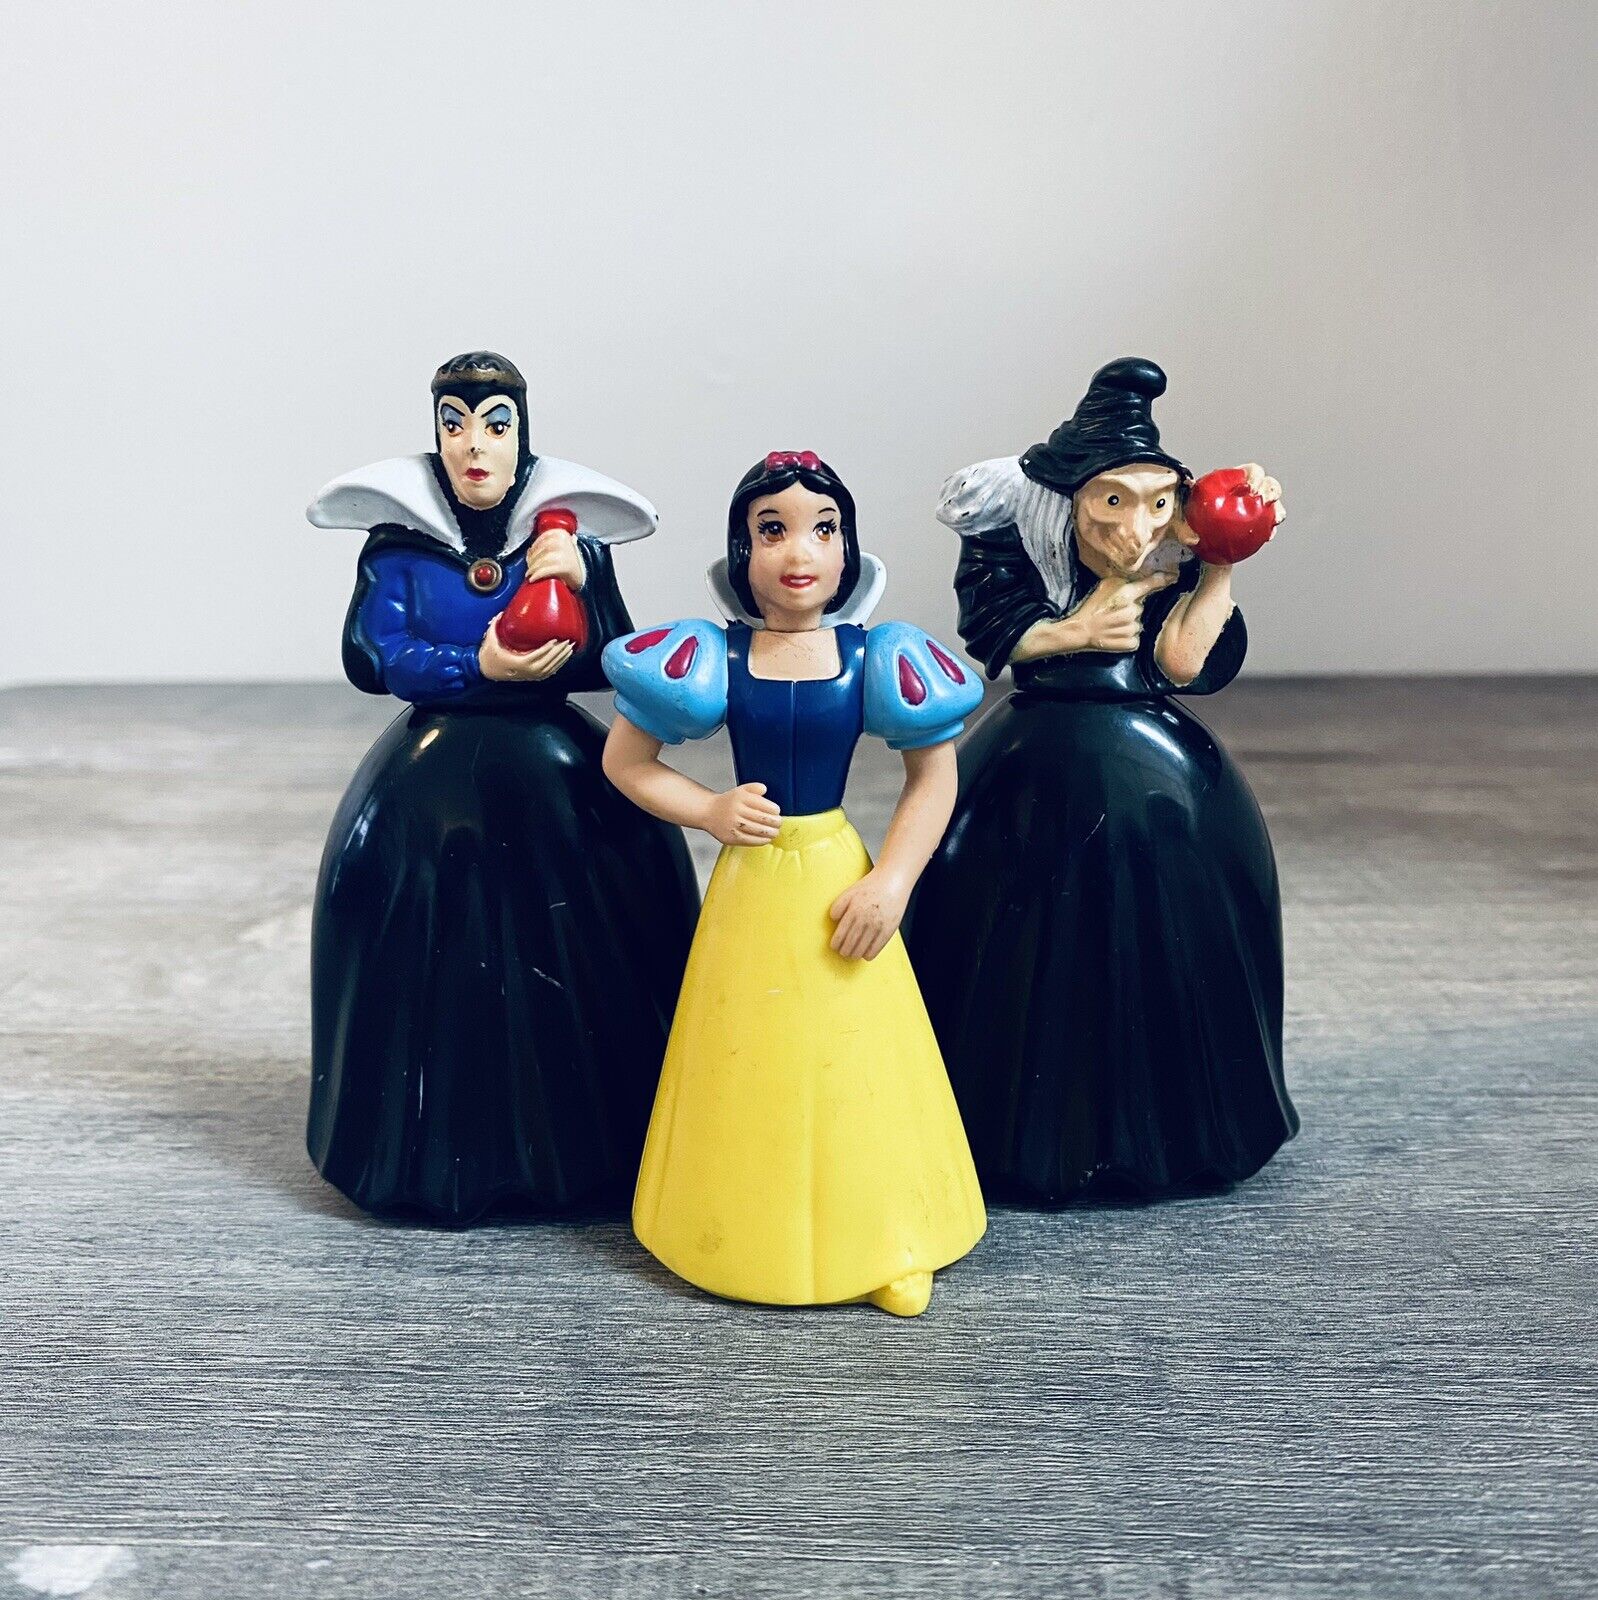 3 Vintage Disney Snow White and the Evil Queen Plastic Toy Figure Cake Toppers